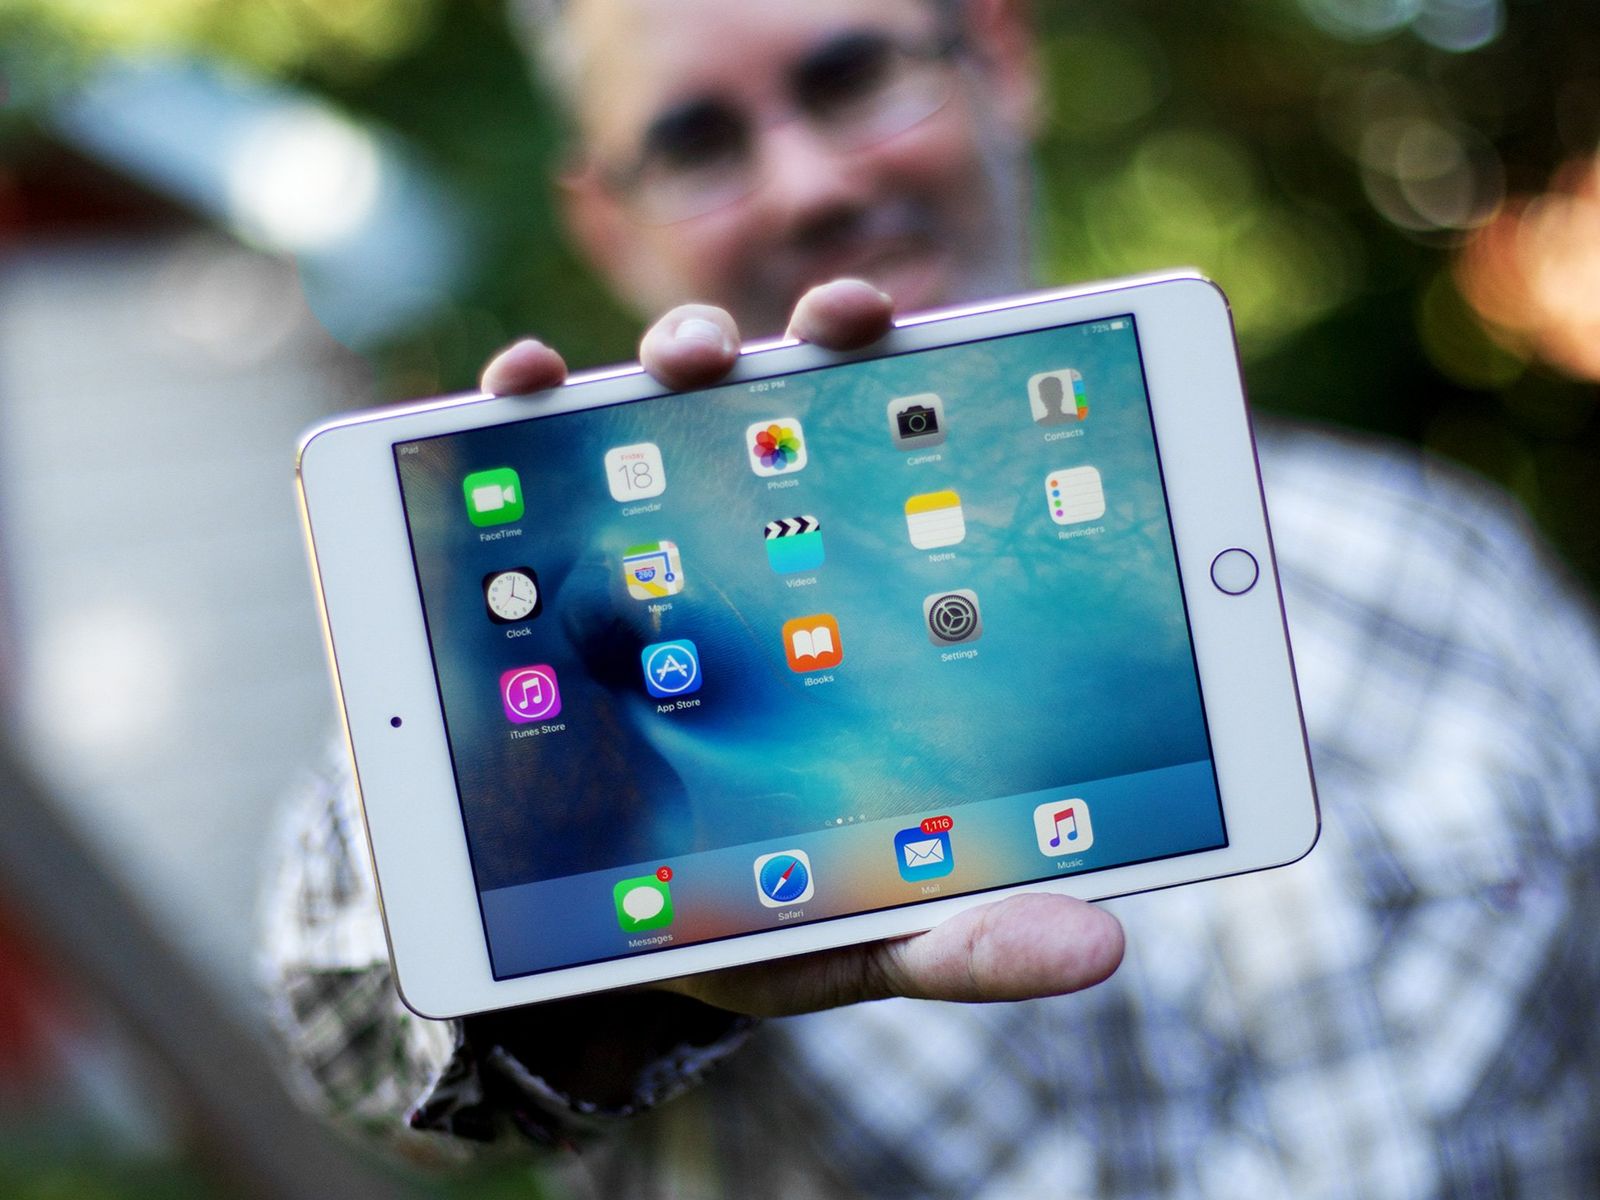 iPad mini 4 review: the best small iPad yet with a great screen and